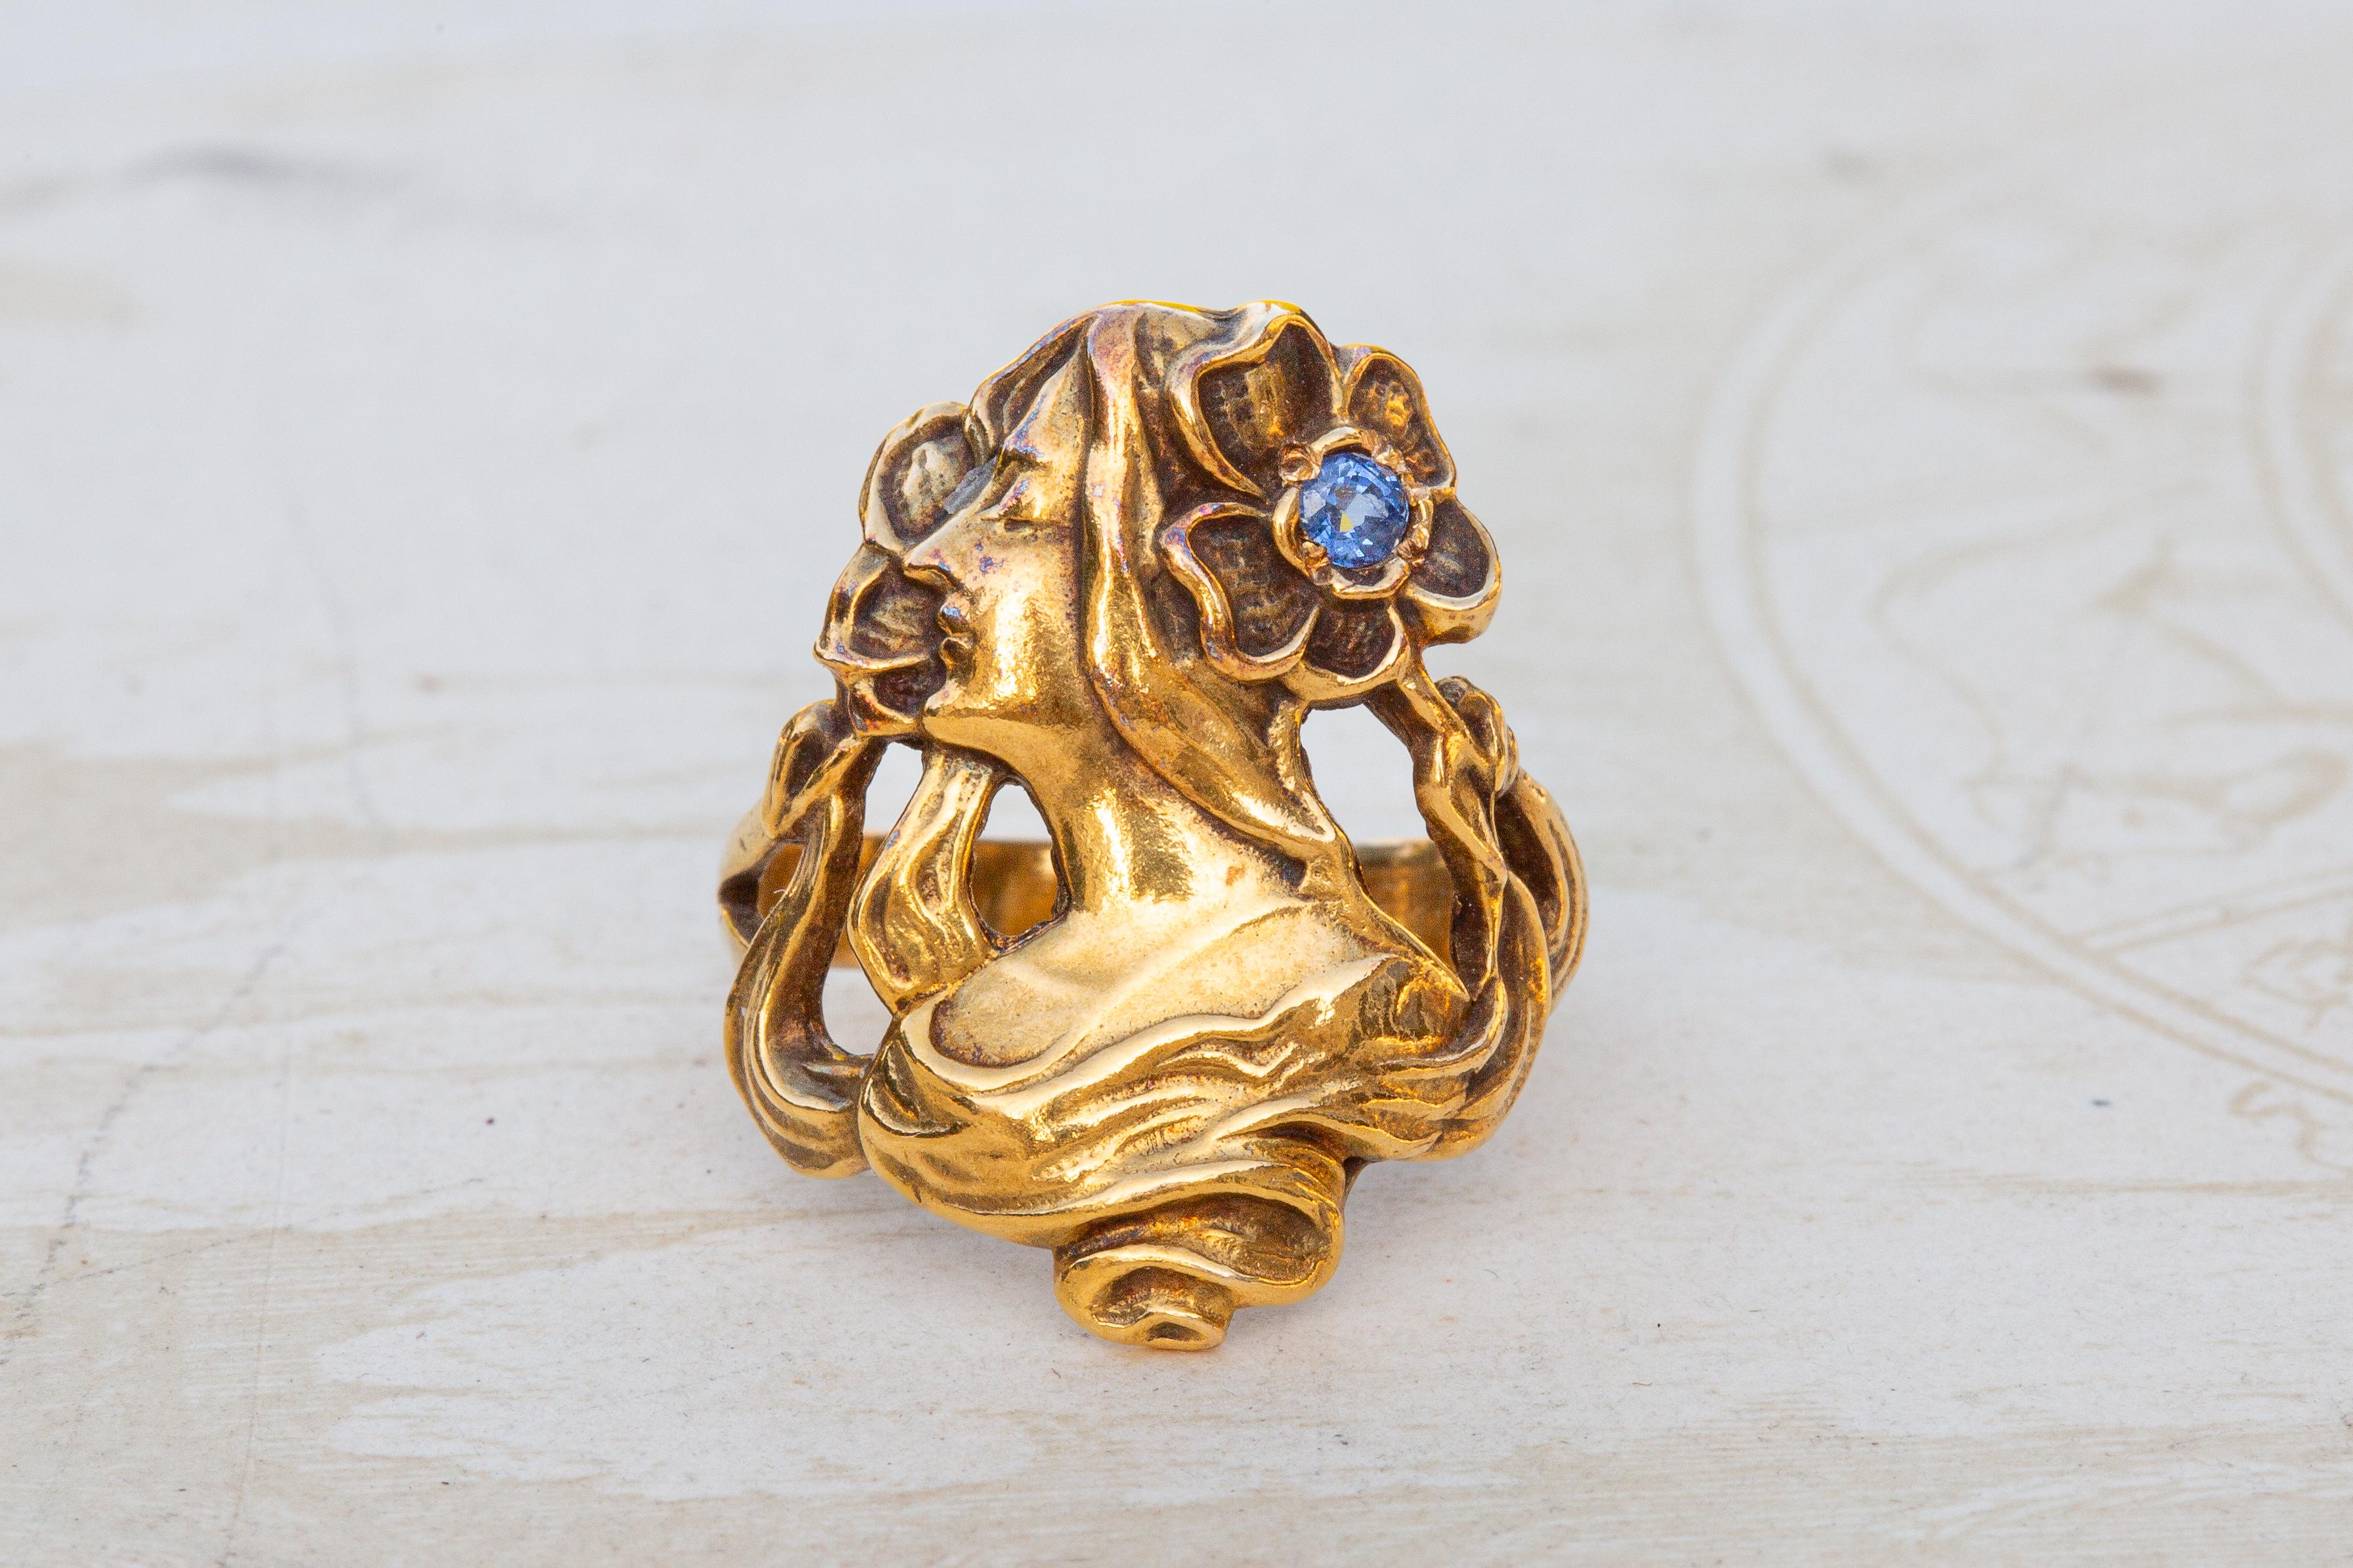 This gorgeous antique Art Nouveau gold ring was made in the Netherlands and dates to the first half of the 20th century. This figural statement ring is an iconic example of Art Nouveau, drawing inspiration from artists like Alphonse Mucha. The ring